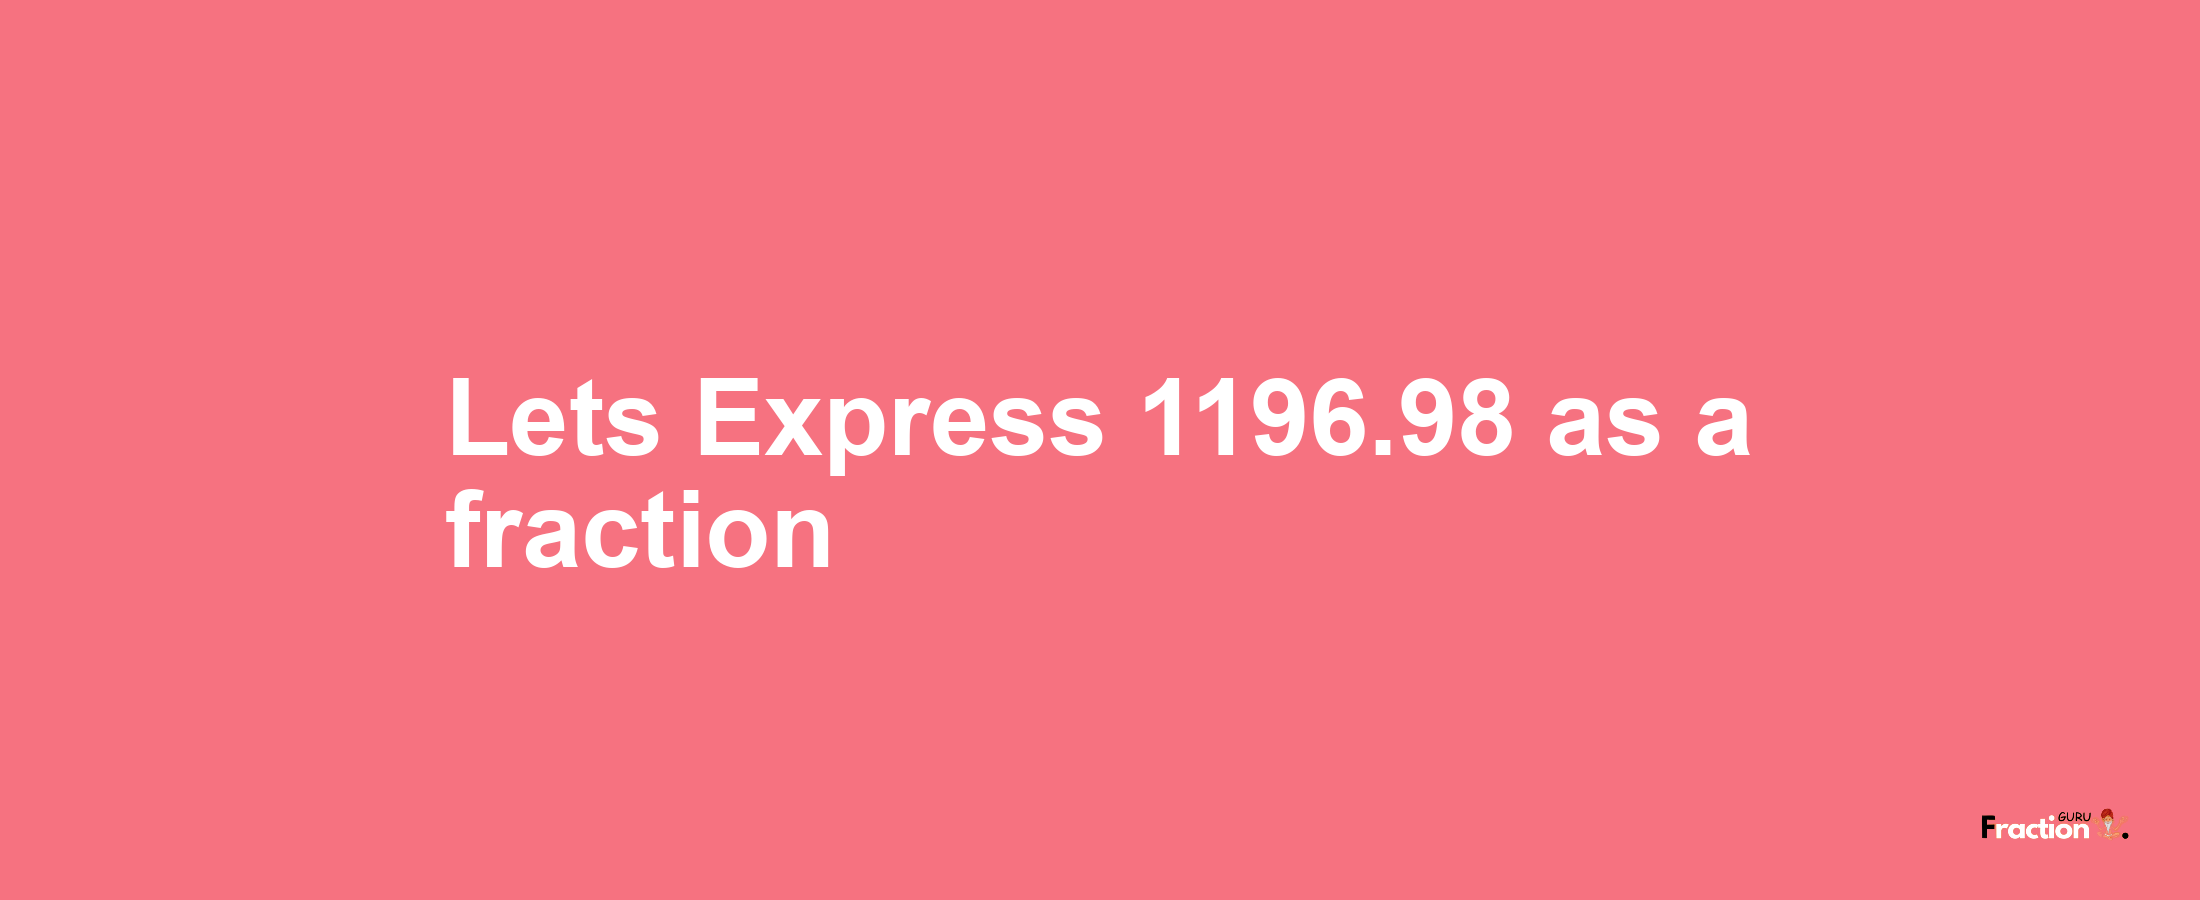 Lets Express 1196.98 as afraction